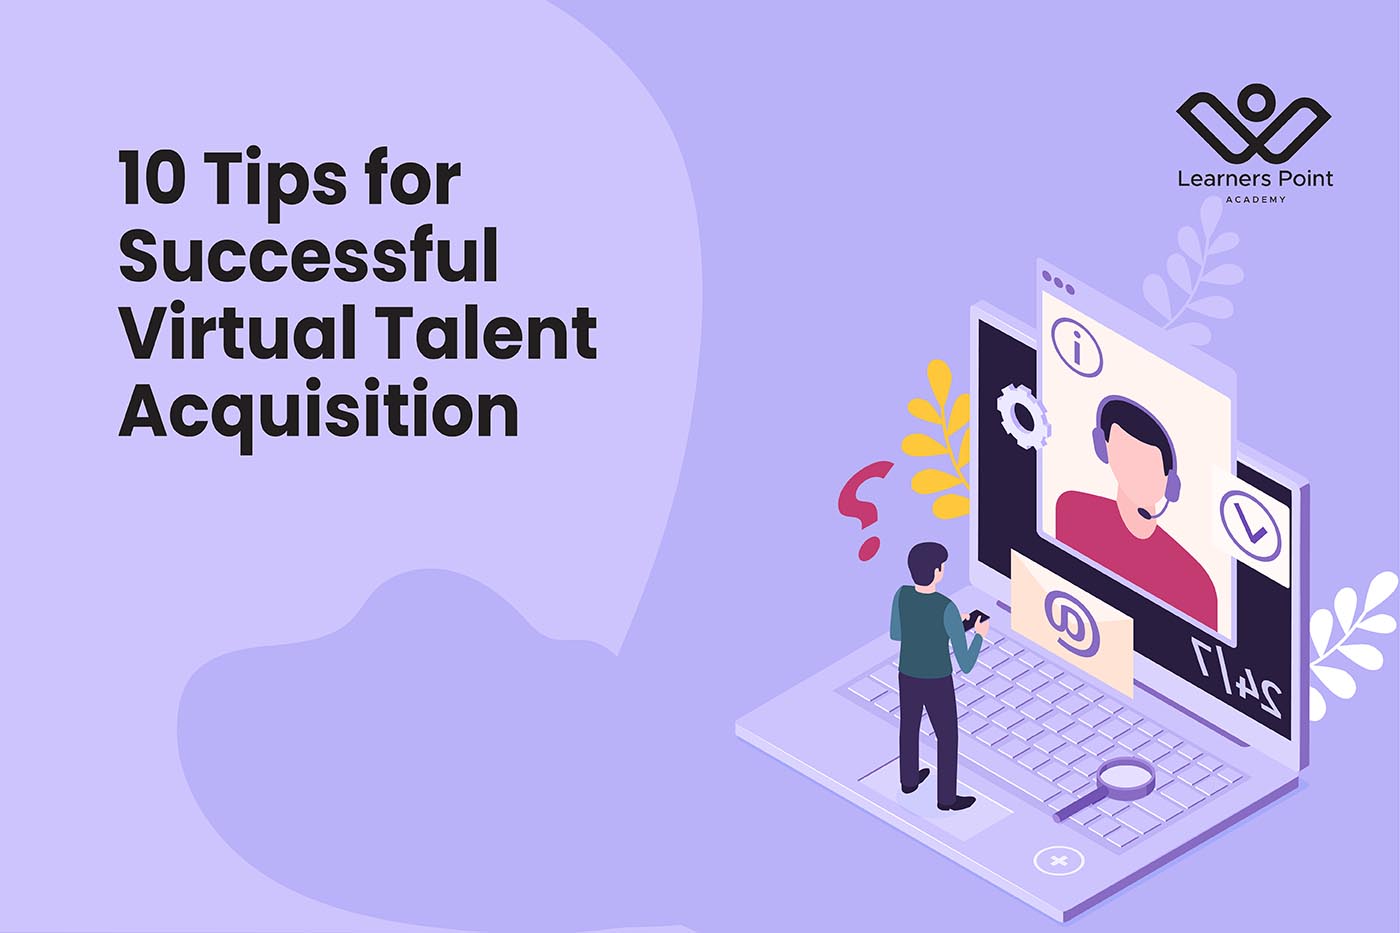 10 Tips for Successful Virtual Talent Acquisition